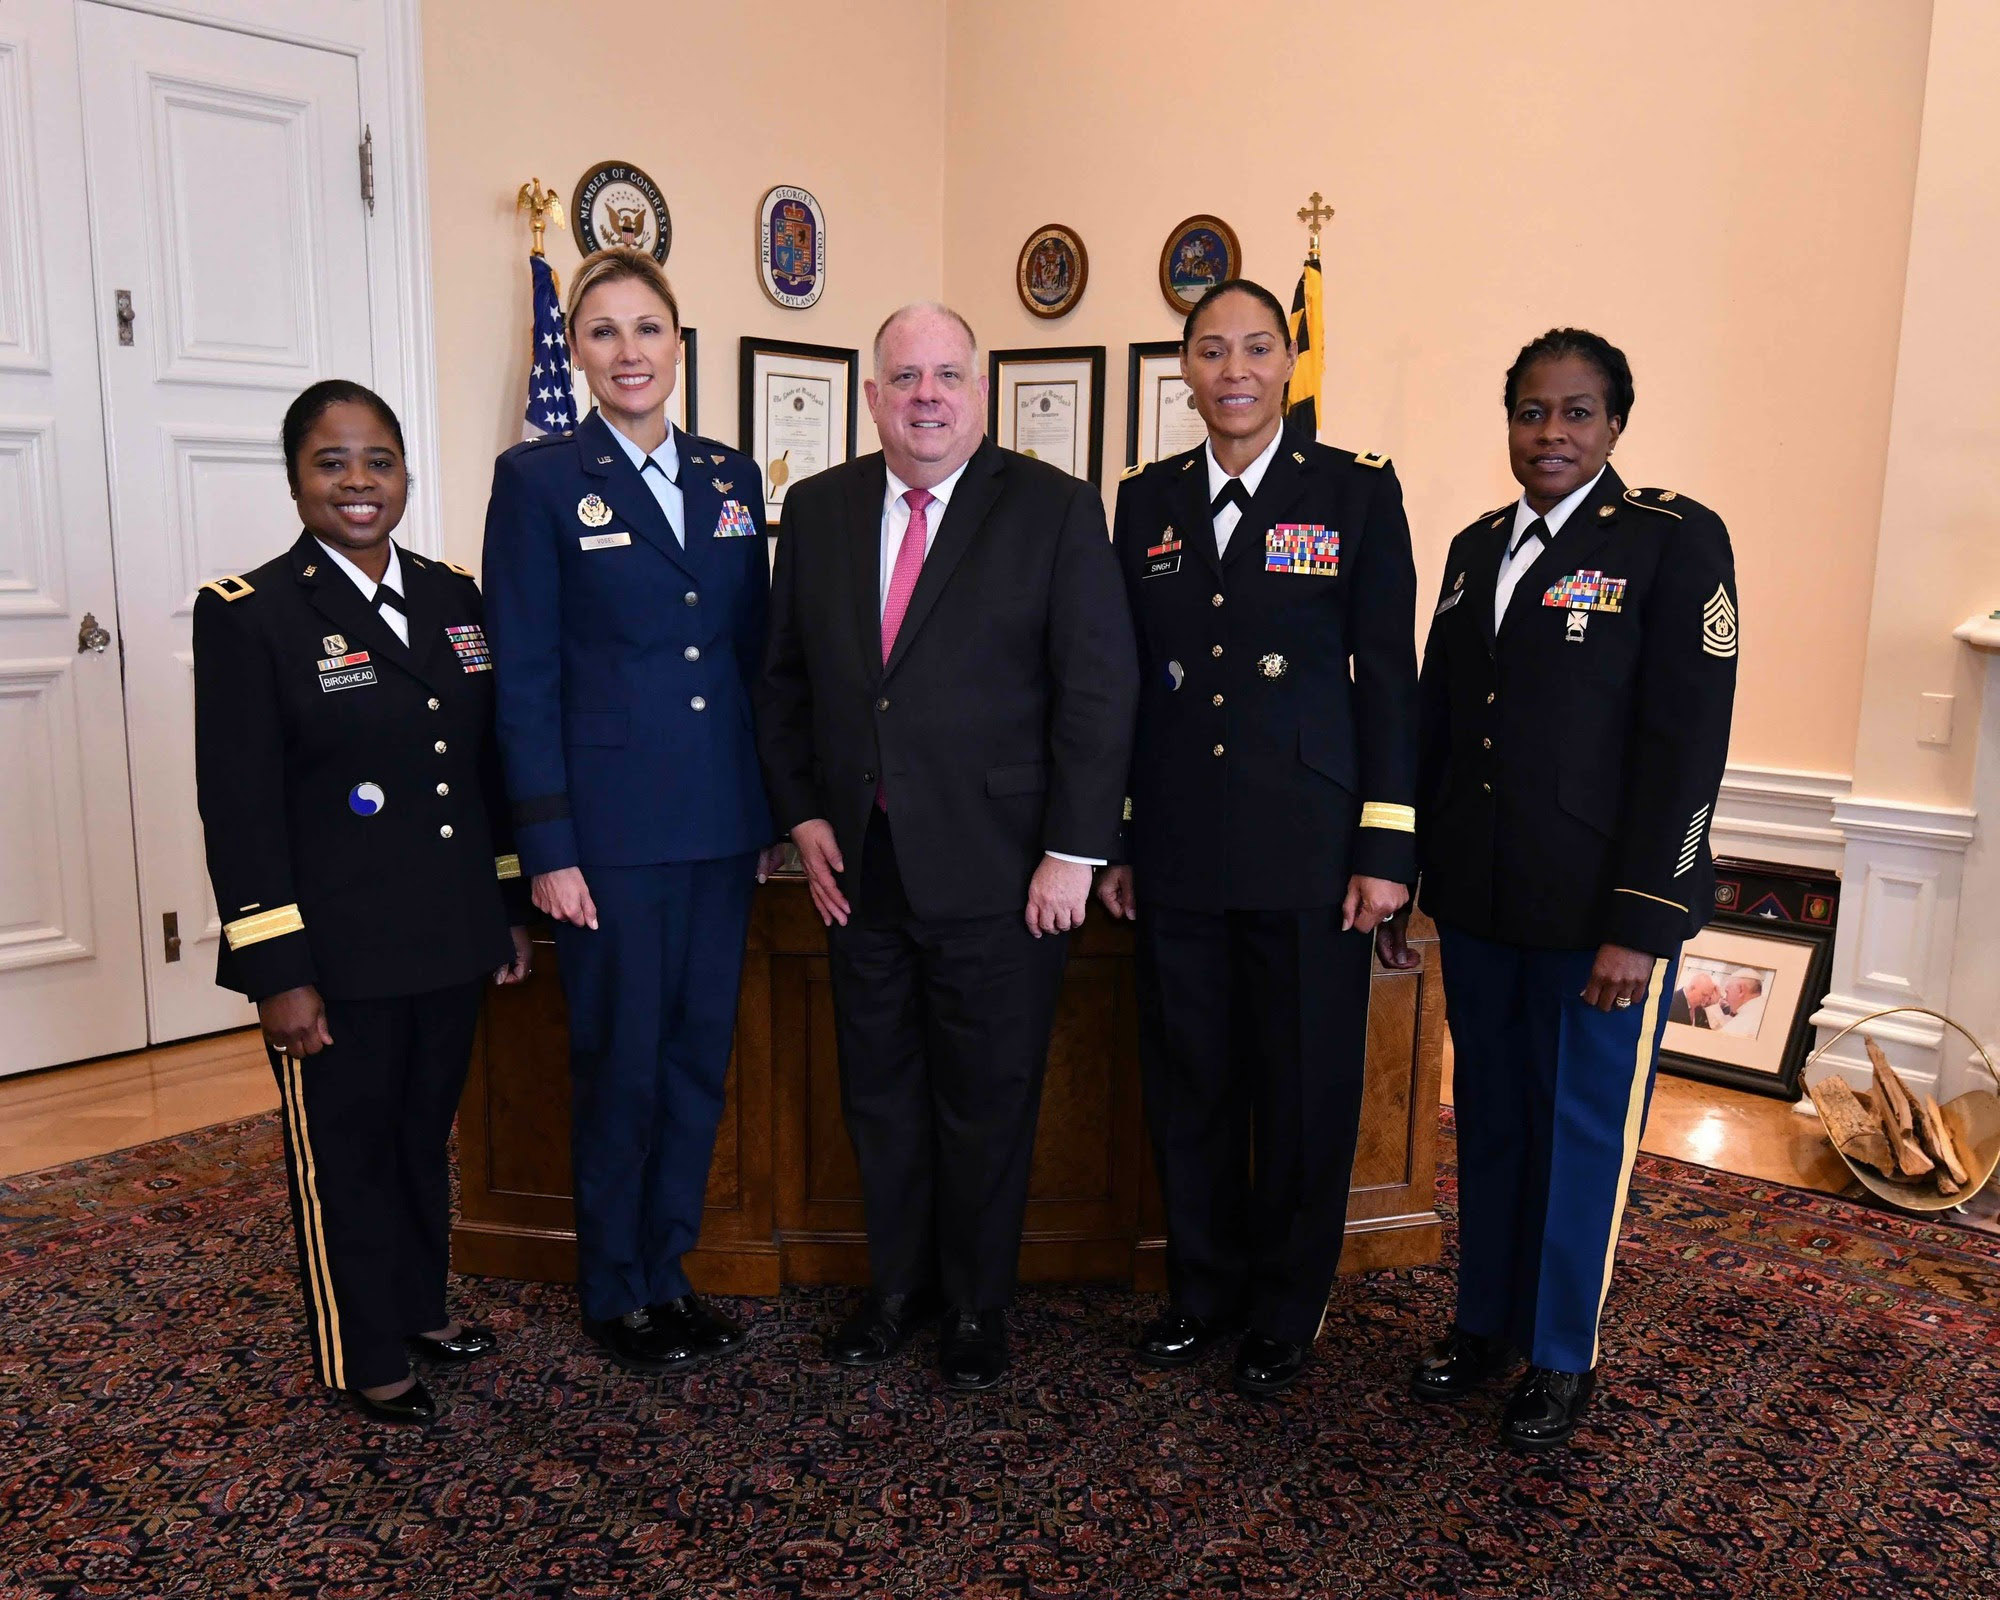 PHOTO: Maryland Governor Larry Hogan poses for a photo with members of the Maryland National Guard’s first-ever all-female command staff.